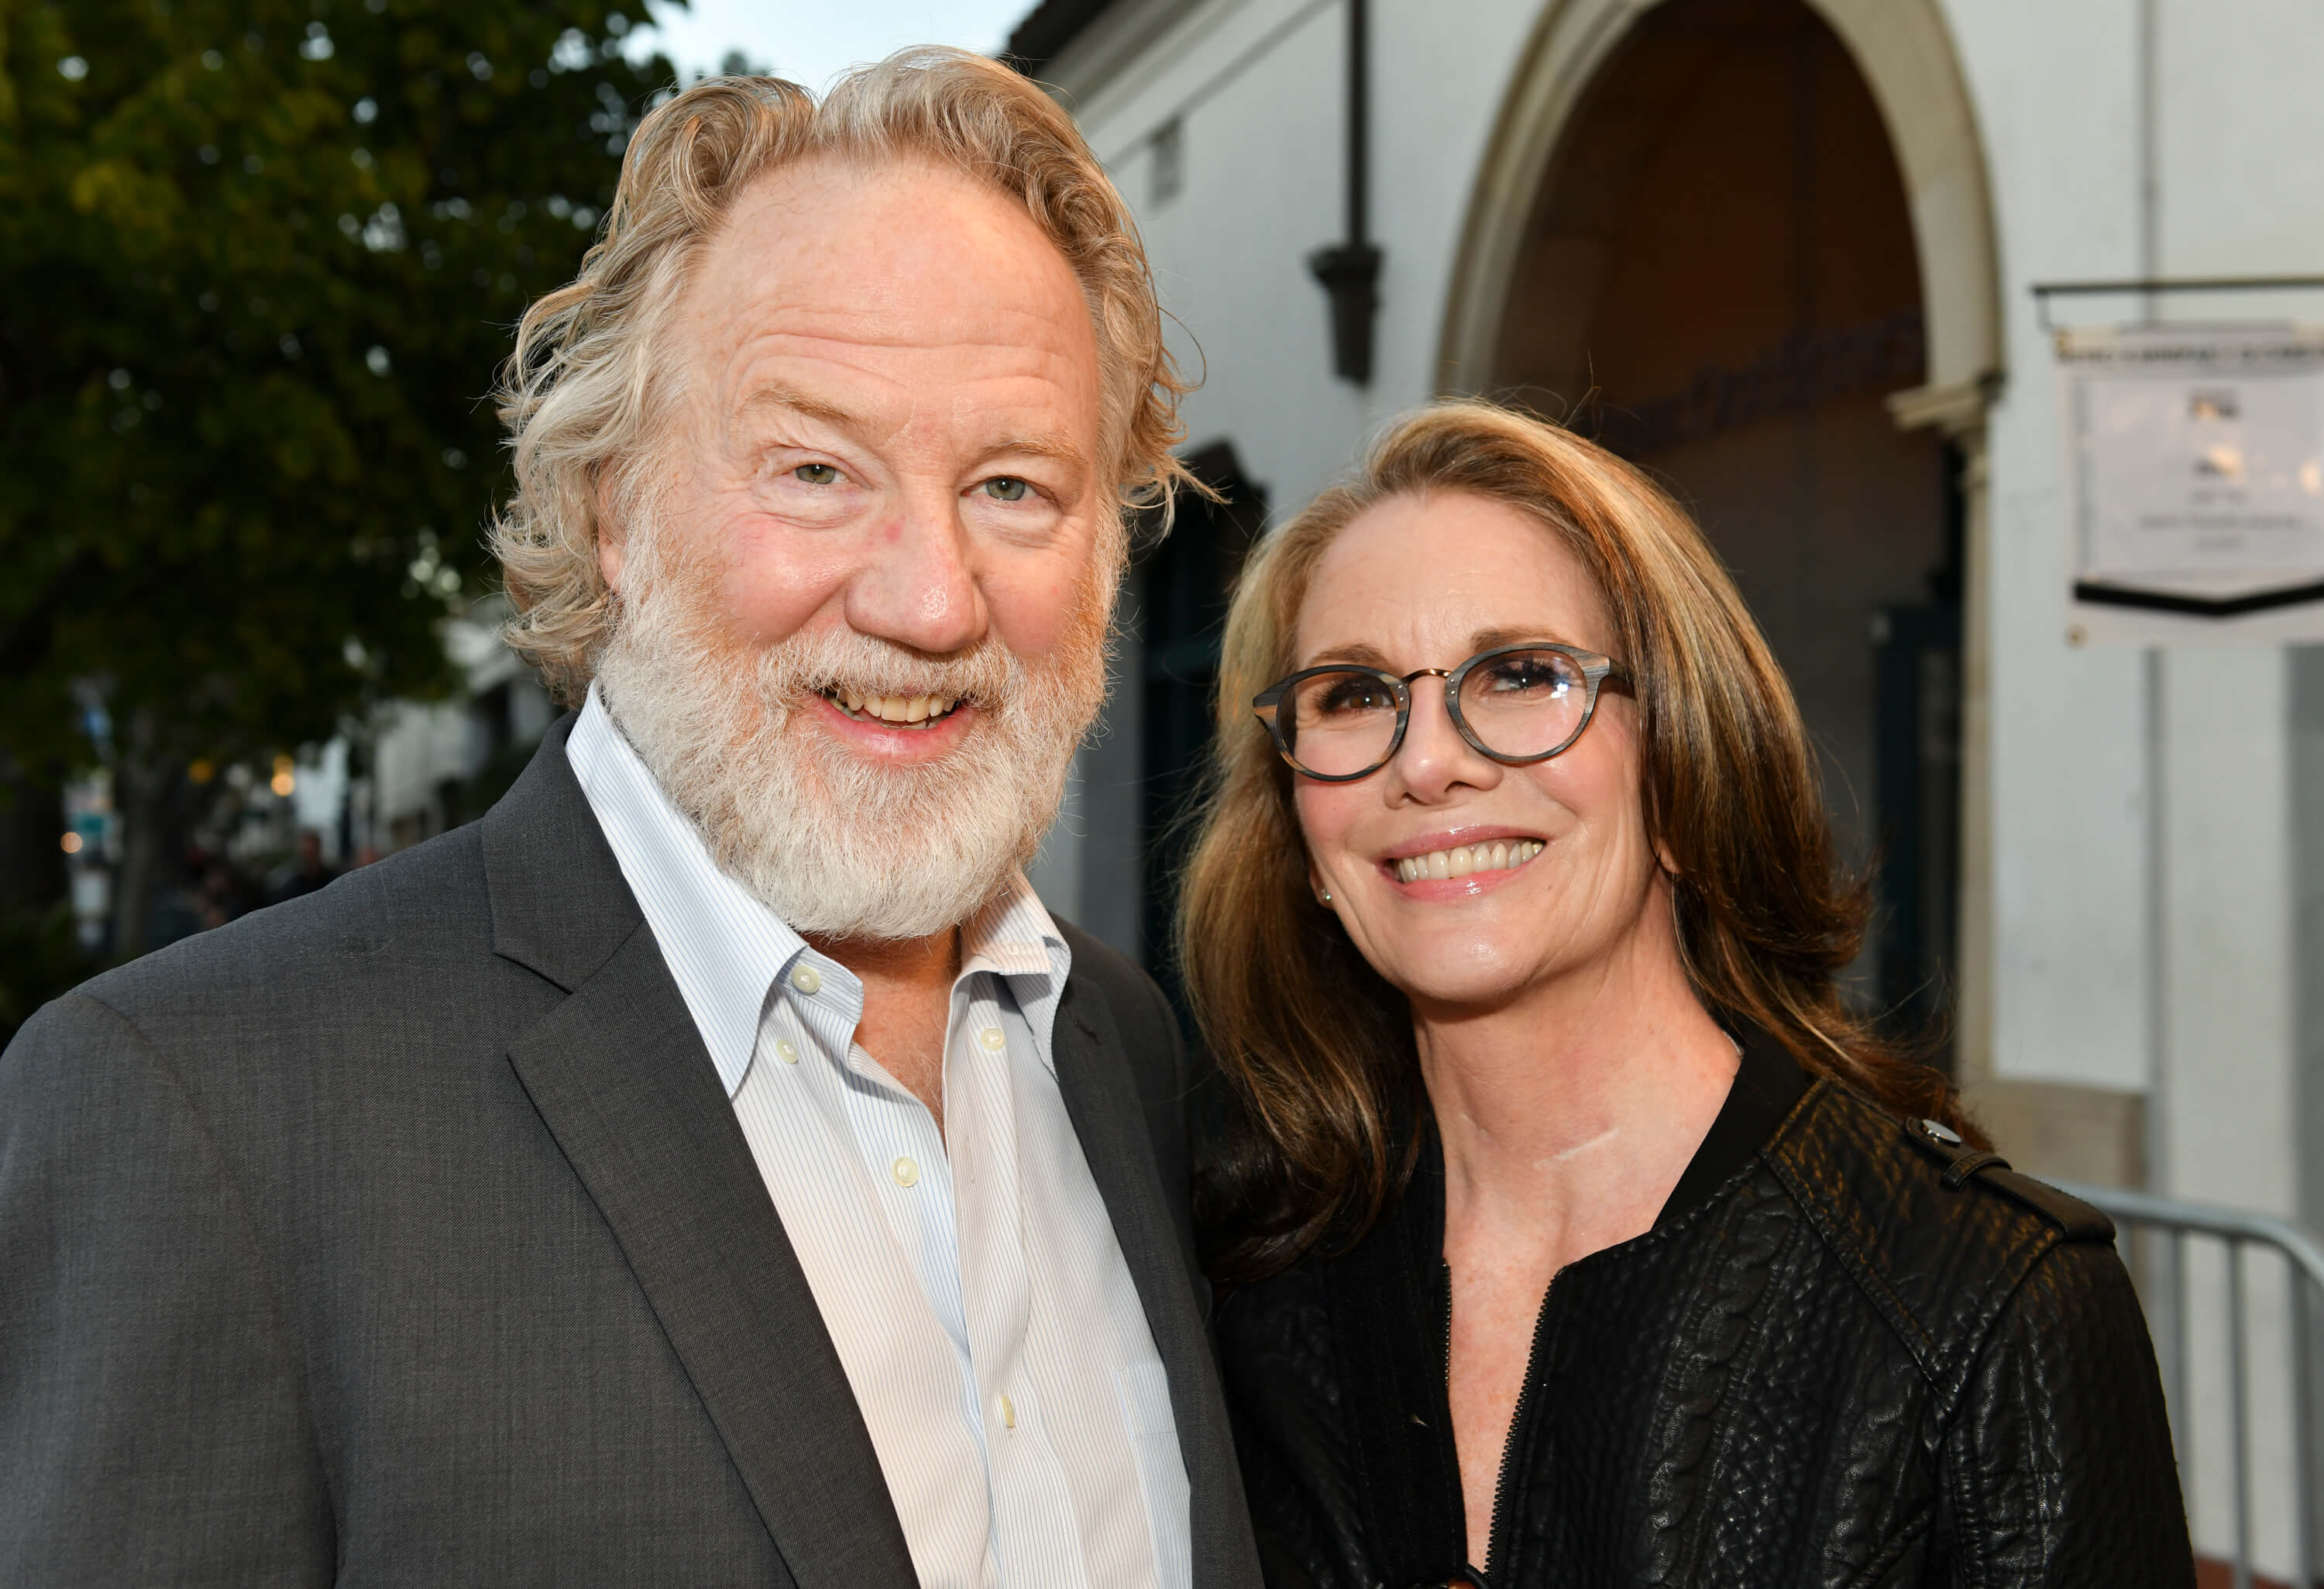 Timothy Busfield and Melissa Gilbert, who moved to the Catskills in 2019, pose for a photo outside.